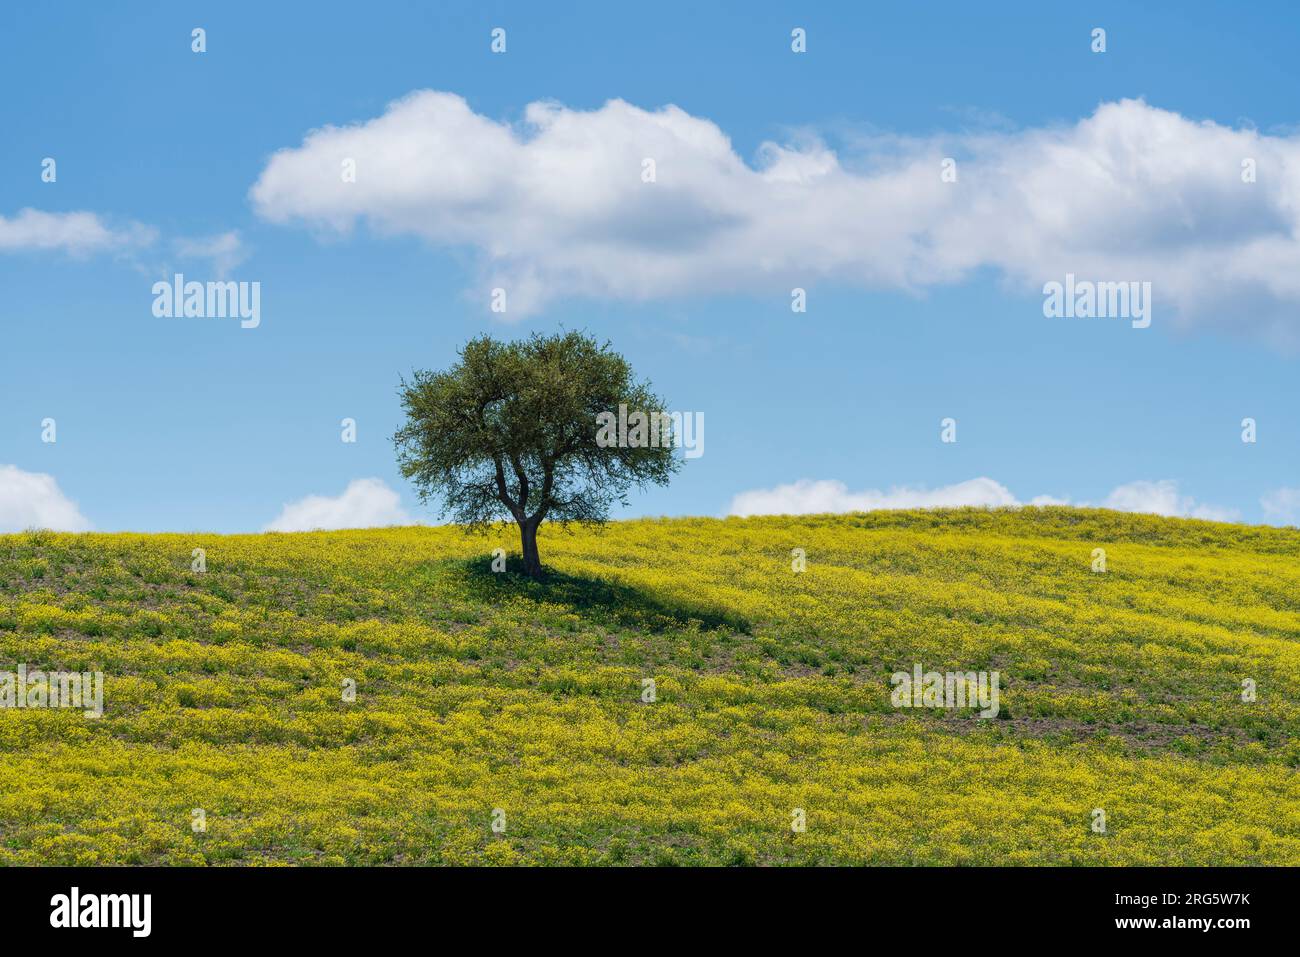 Lonely olive tree on the hill and yellow flowers in the field. A few fluffy clouds in the sky. Tuscany region, Italy. Stock Photo